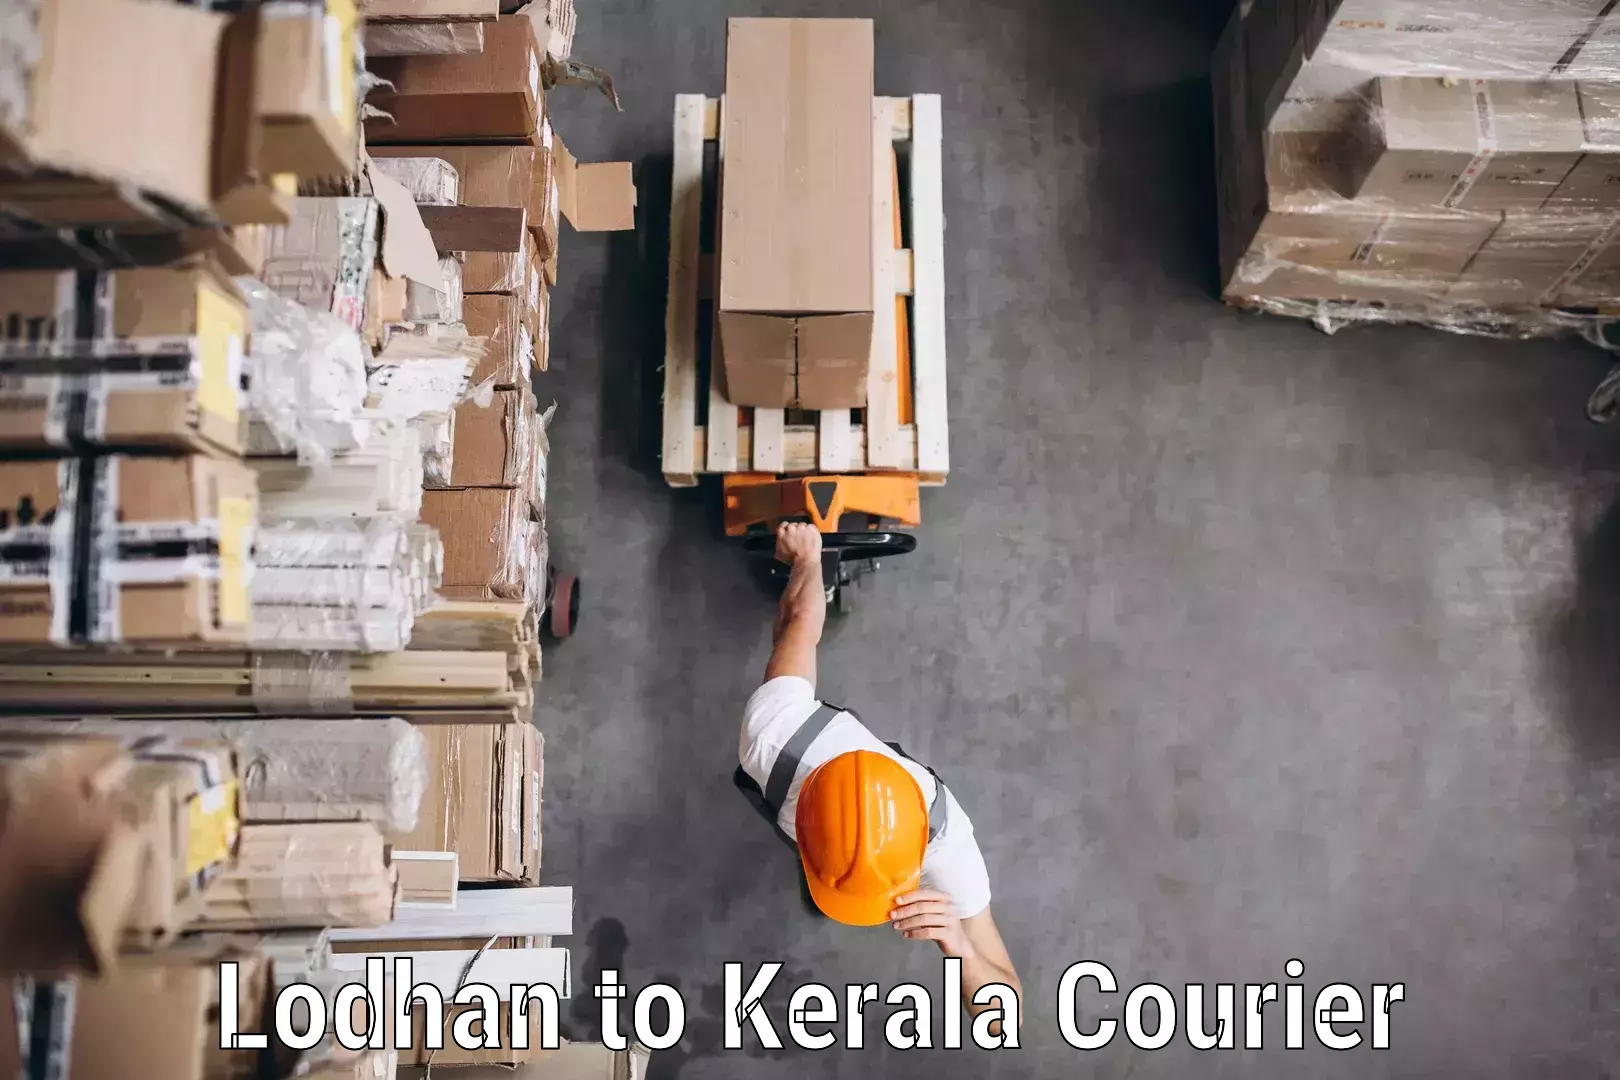 Express delivery solutions Lodhan to Kerala